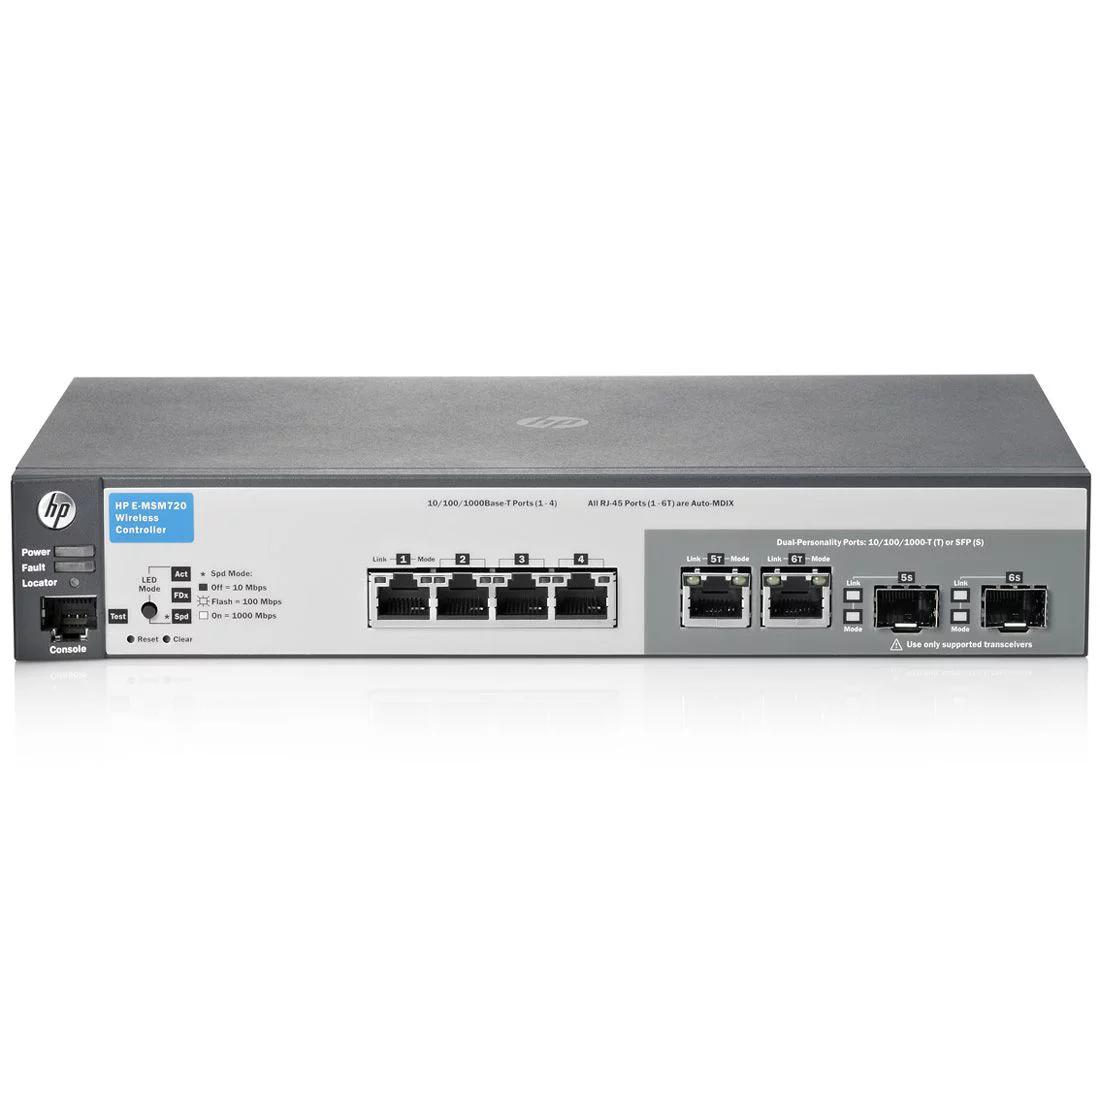 Hpe msm720 premium mobility controller ww - advanced wireless network management